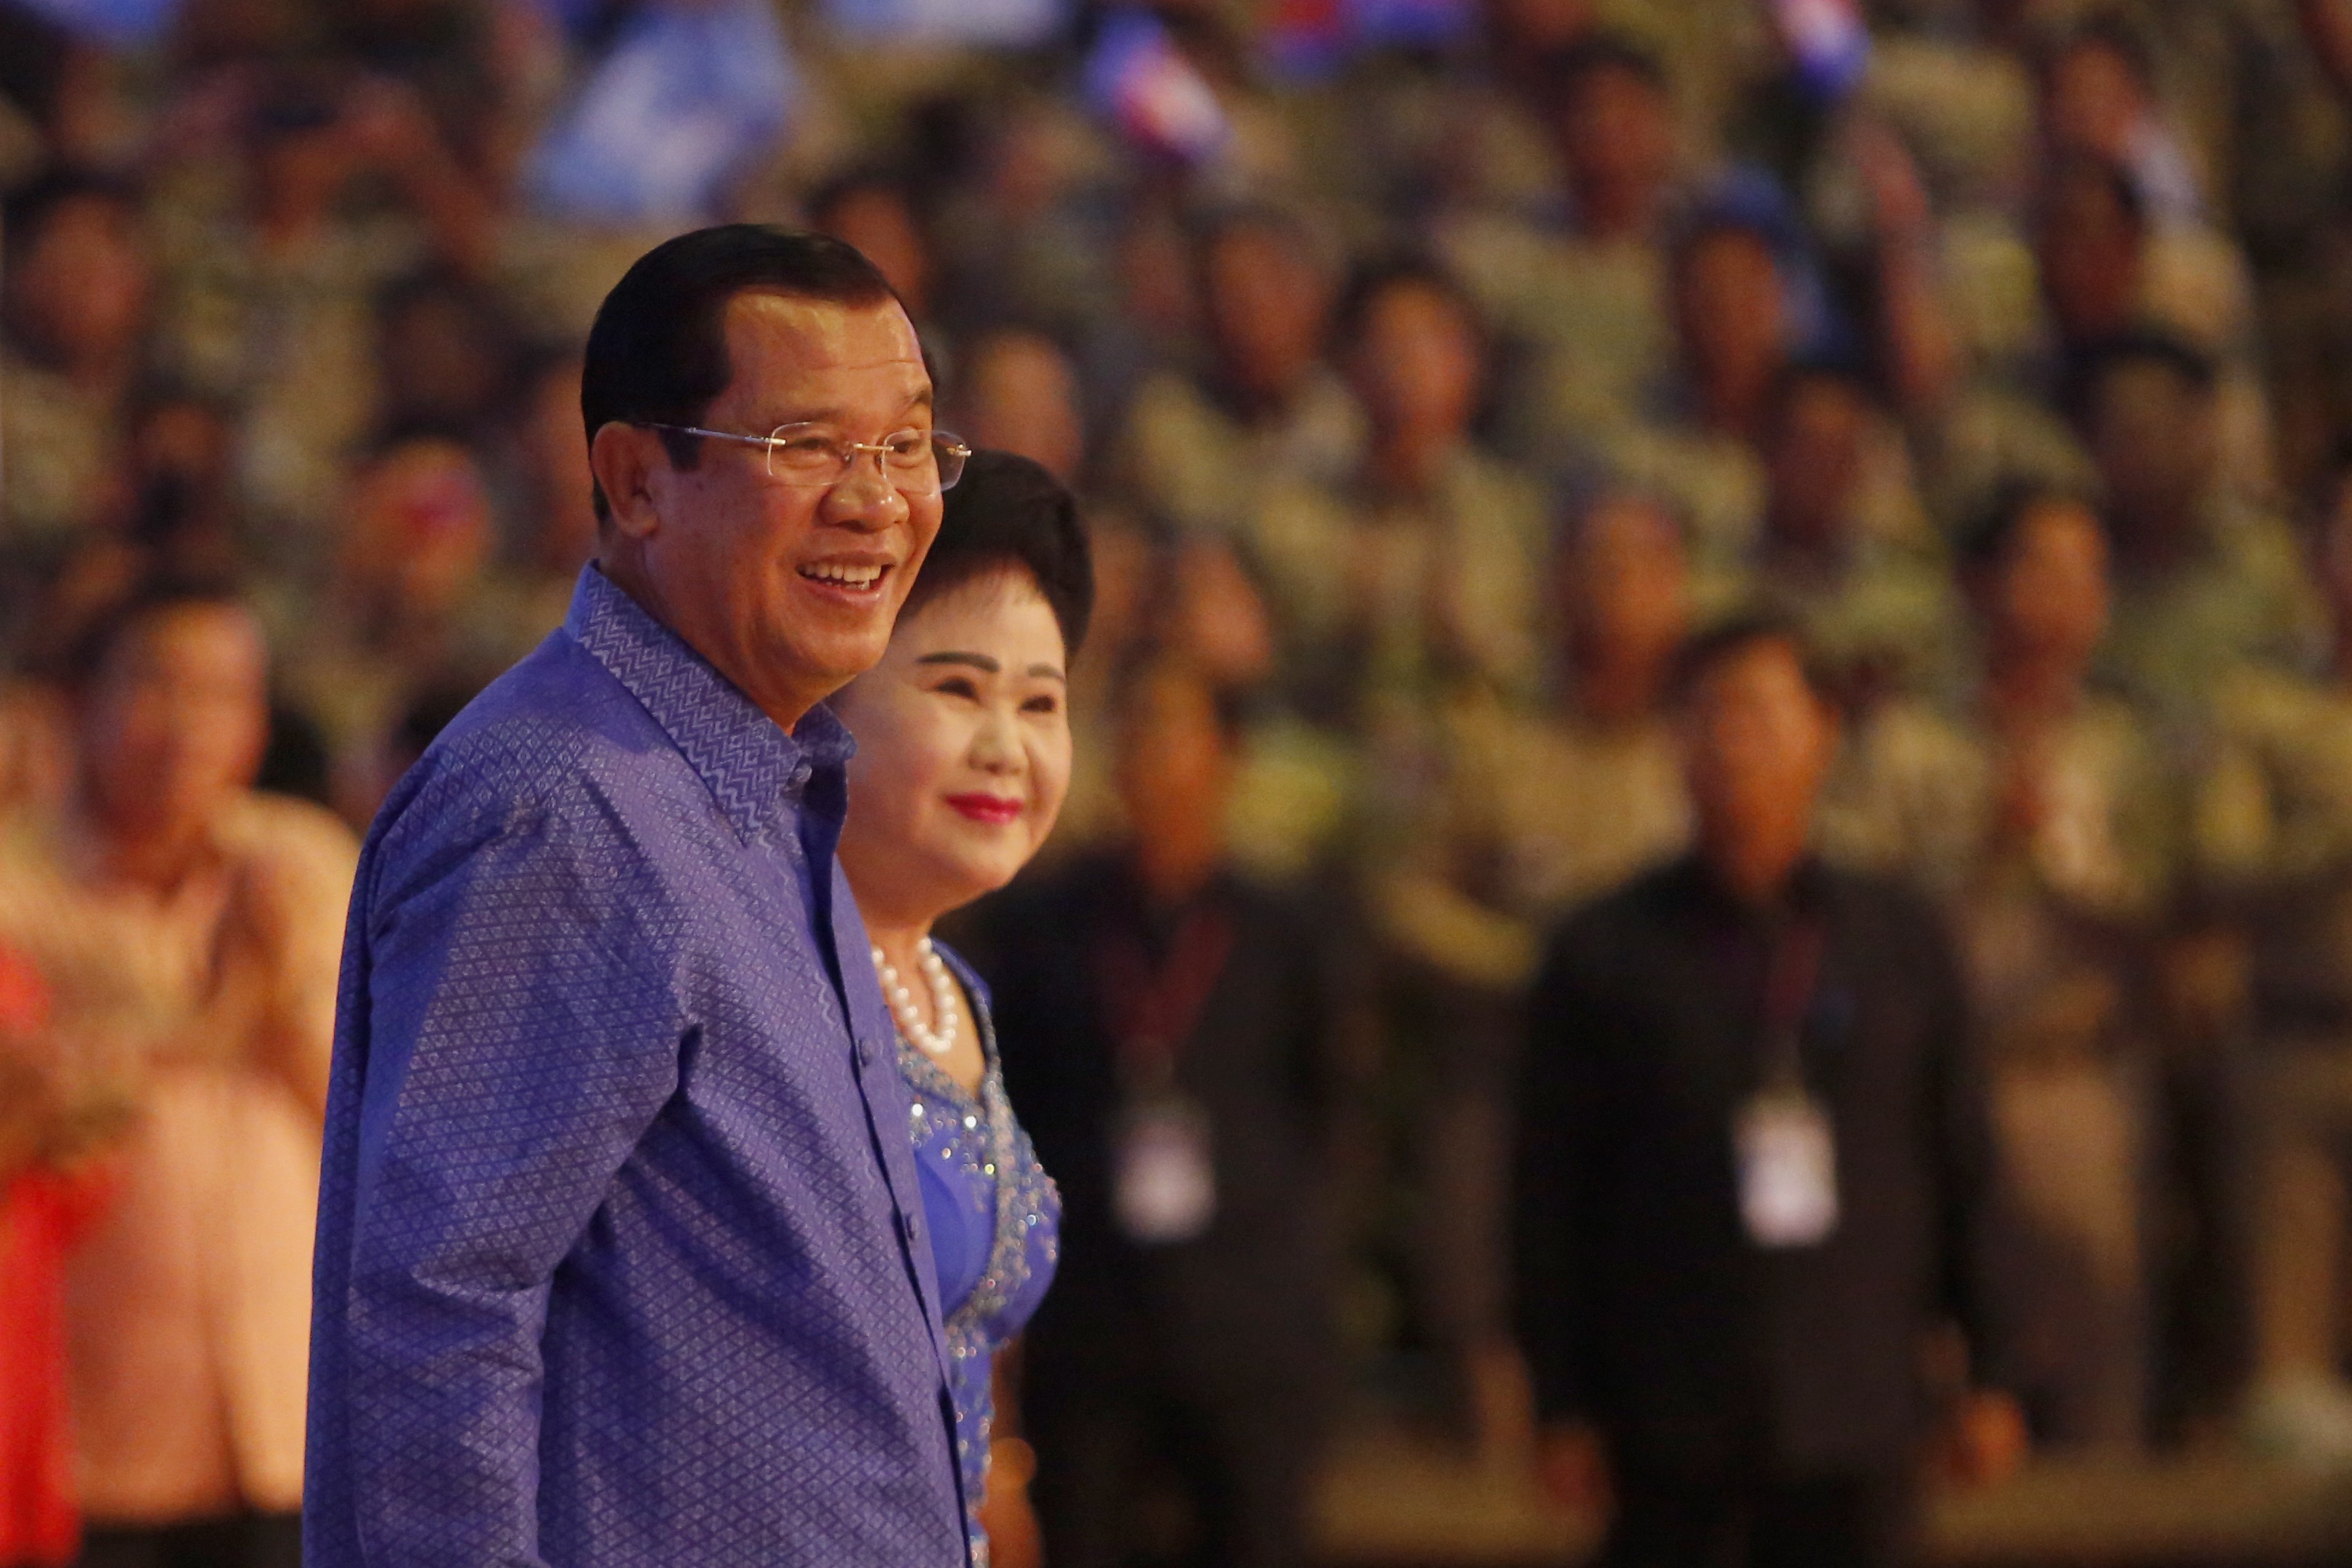 As the prime minister’s rigged election seems sure to extend his 33-year reign, Cambodians despair the onset of one-party rule